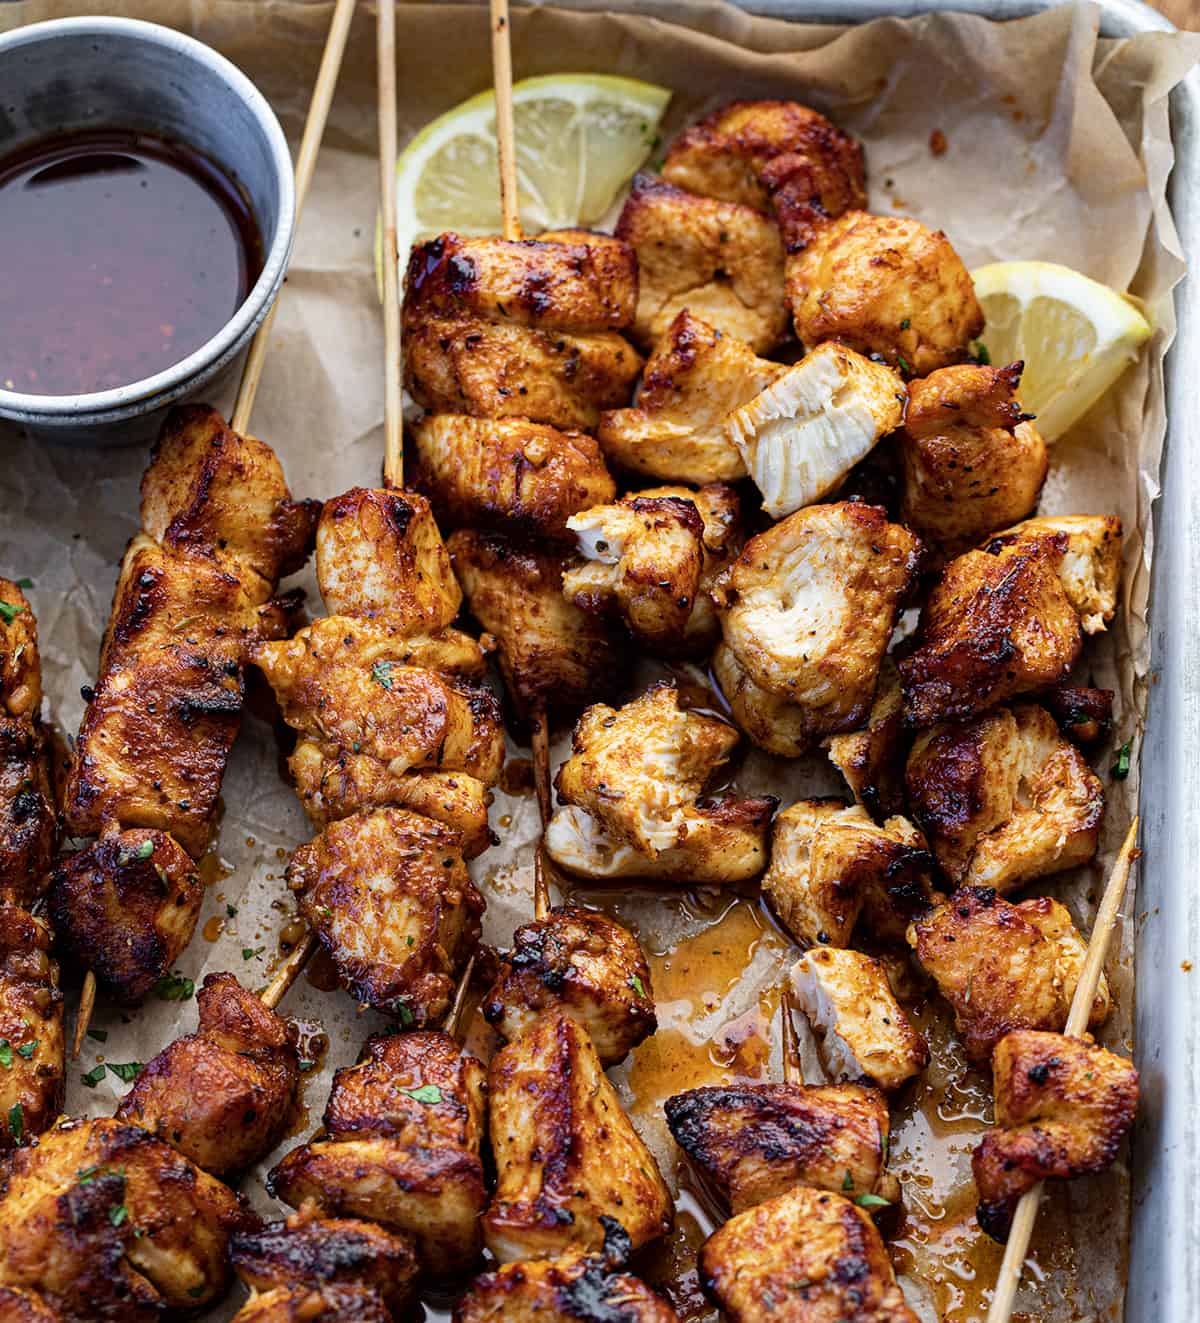 Lemon Pepper Chicken Skewers with Some of the Chicken Removed From the Skewers.